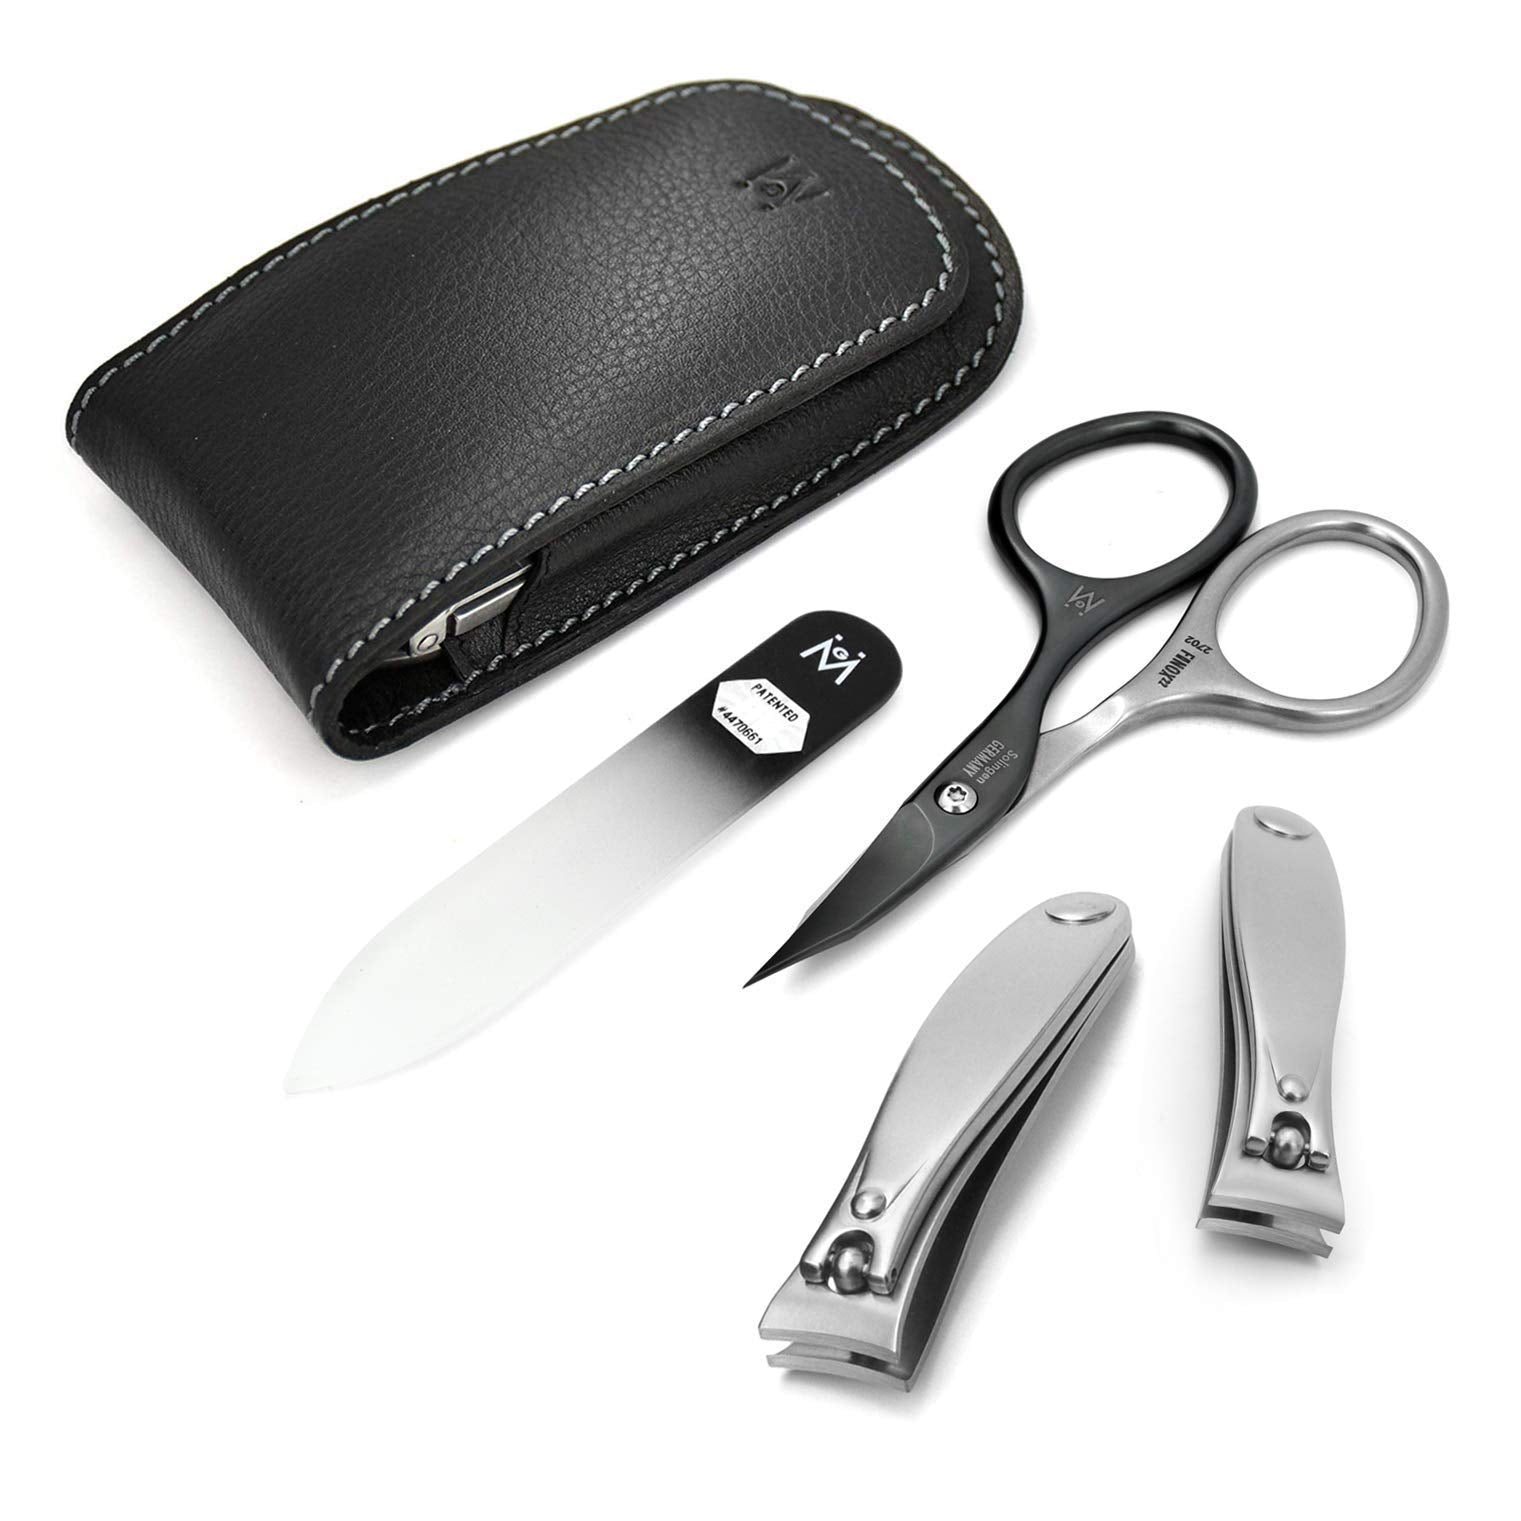 4 Piece Manicure Set in Black Leather Case: 2 Nail Clippers, Self Sharpening Combination Scissor, and Travel Glass Nail File